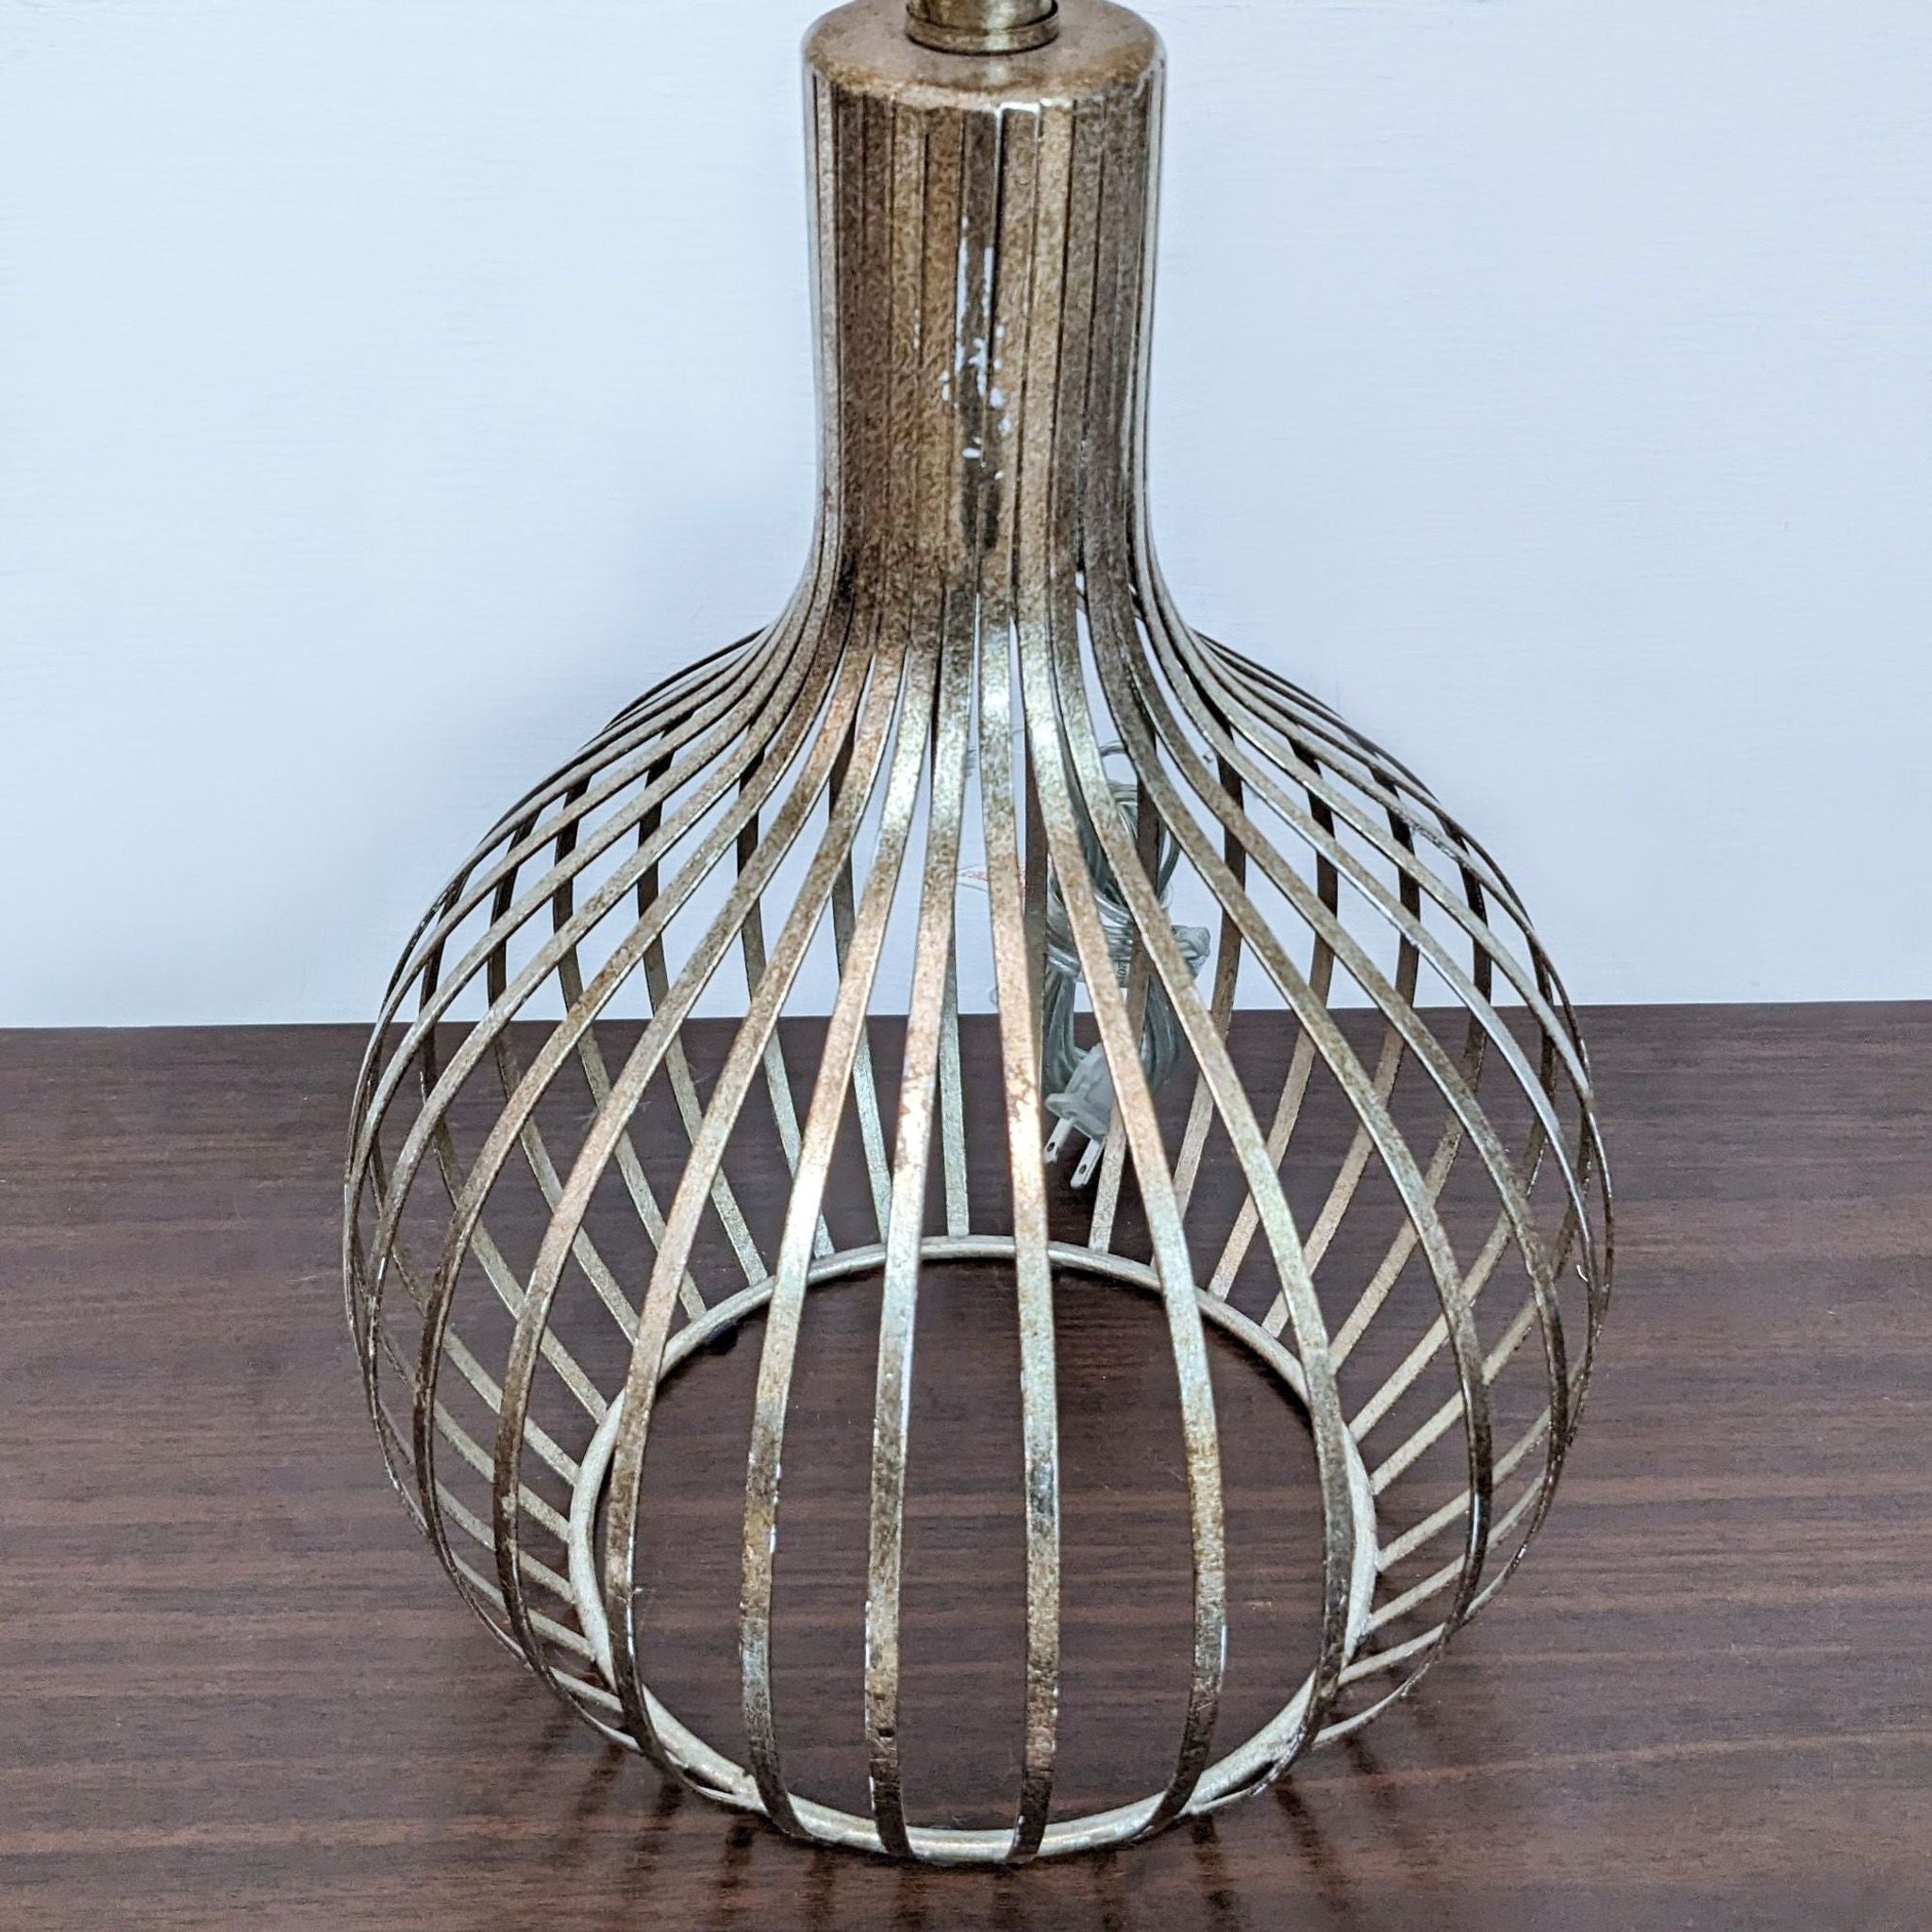 Reperch brand vintage-style metallic pendant lamp with openwork design on wooden surface.